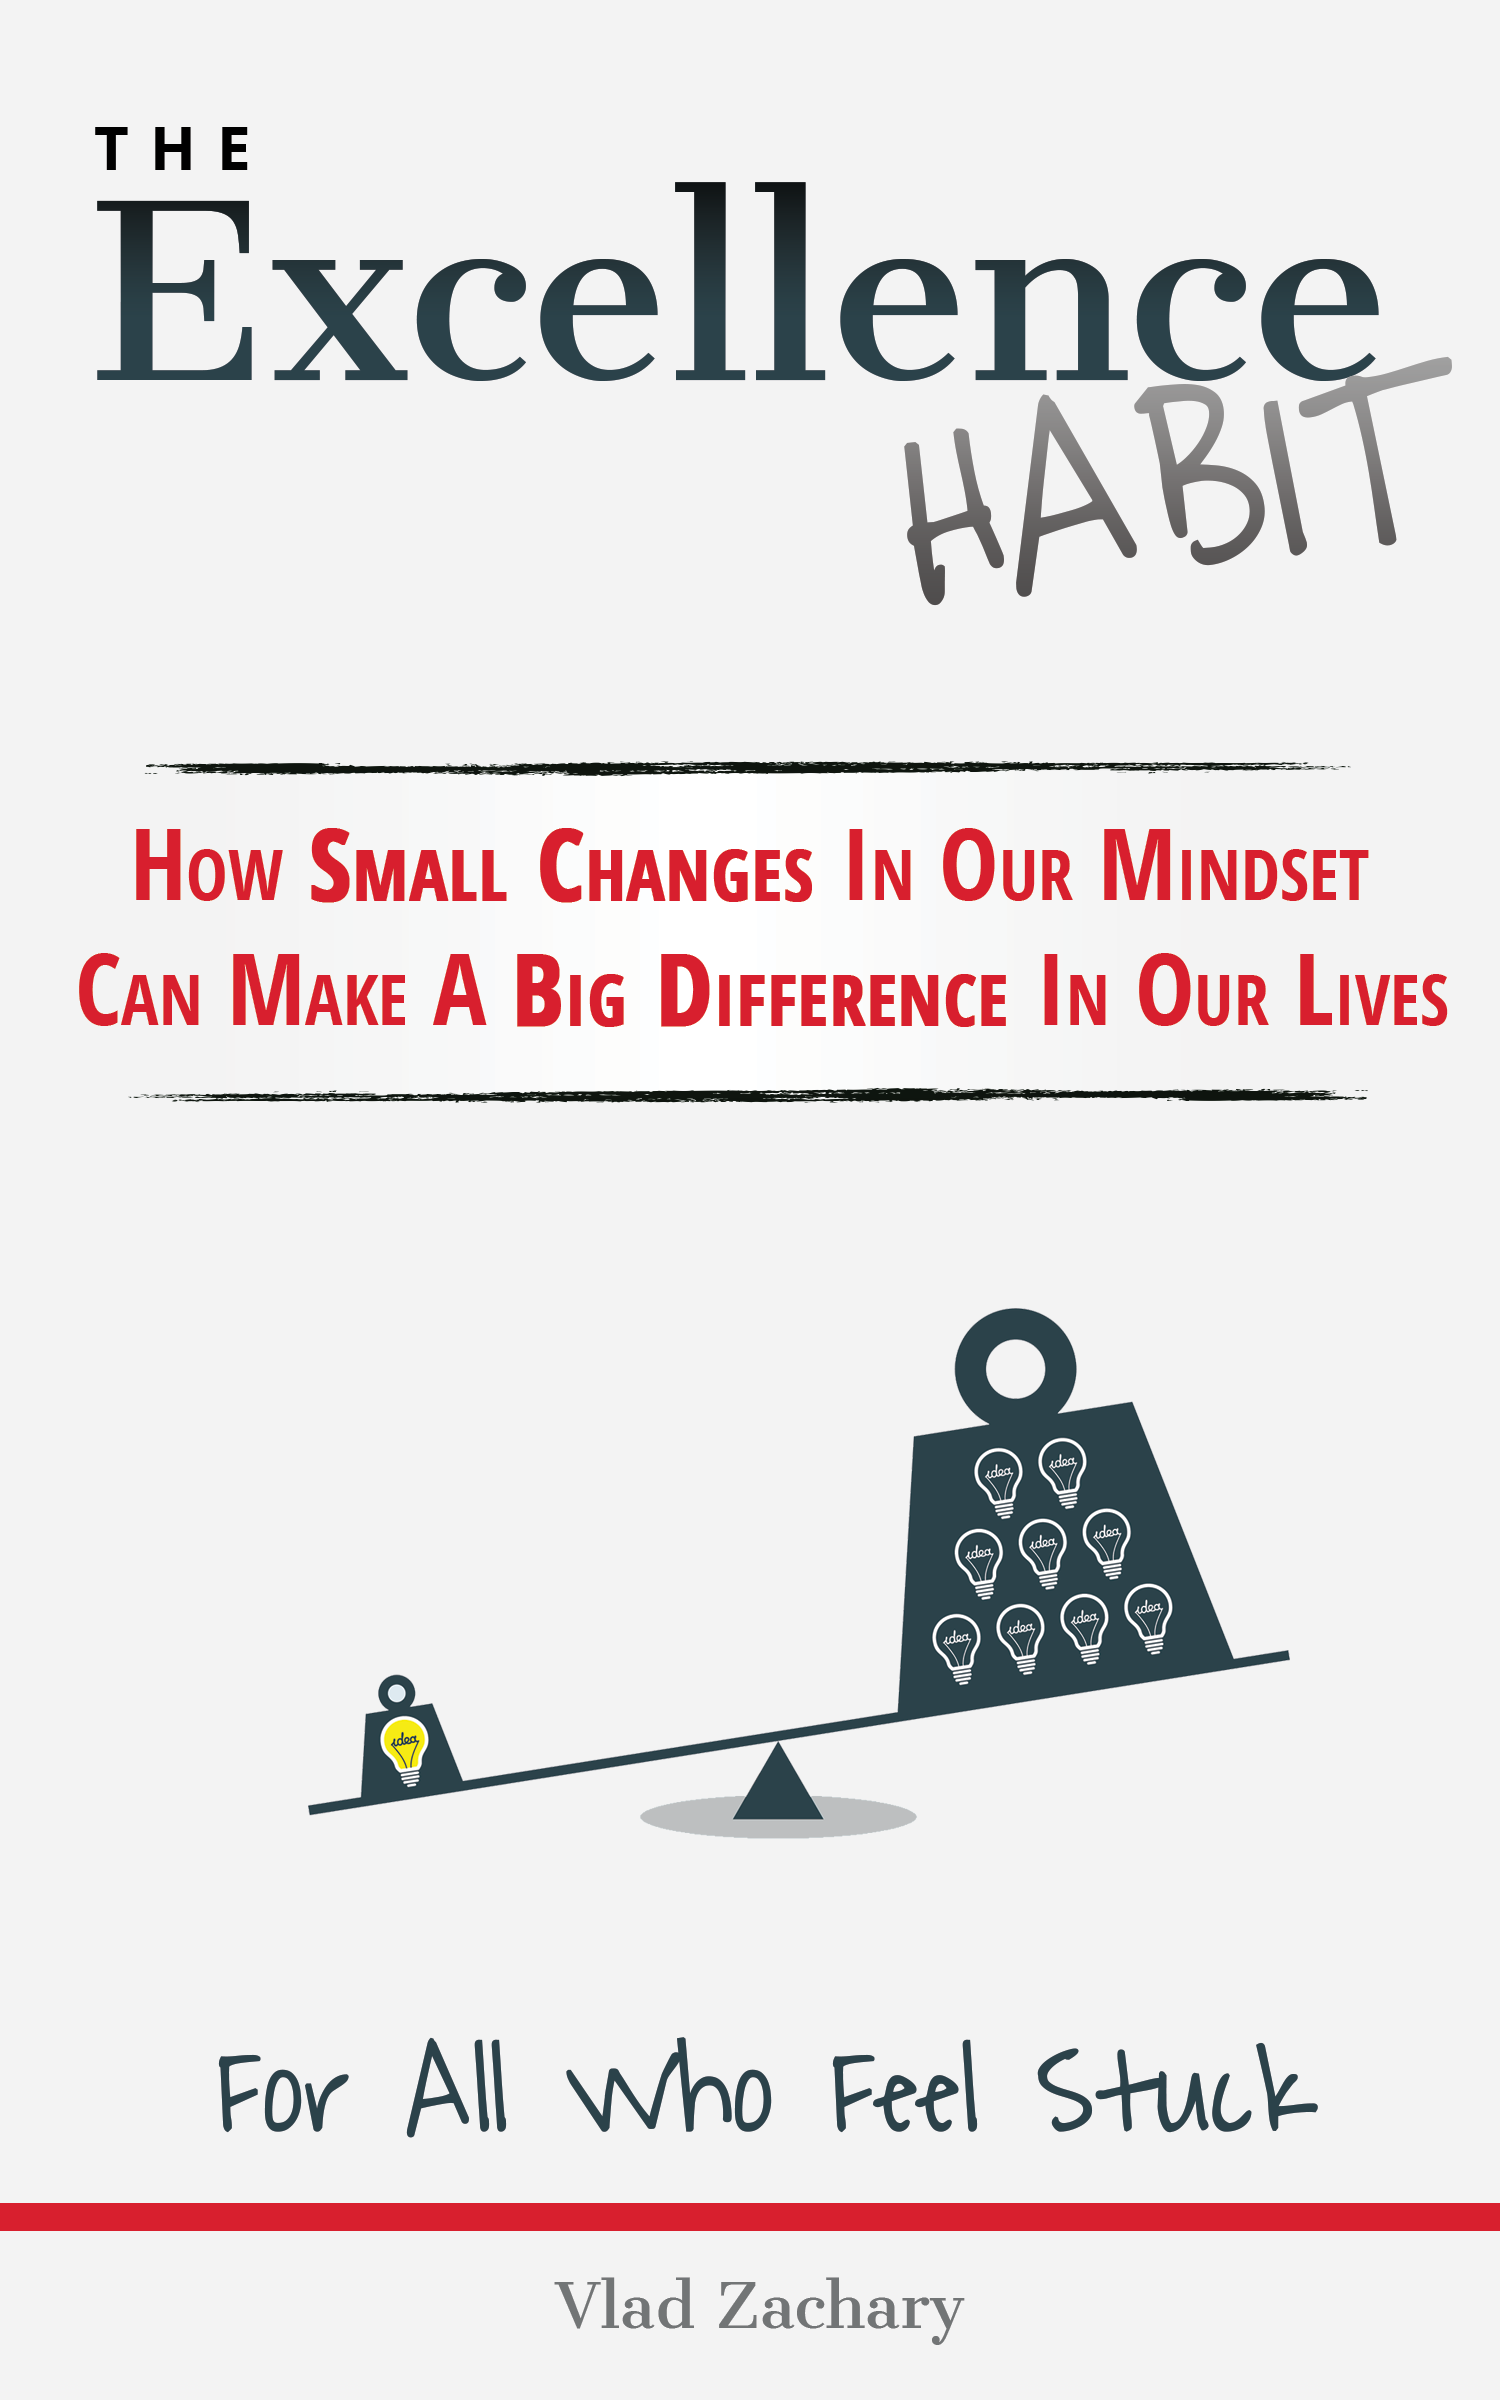 FREE: The Excellence Habit – How Small Changes In Our Mindset Can Make A Big Difference In Our Lives by Vlad Zachary